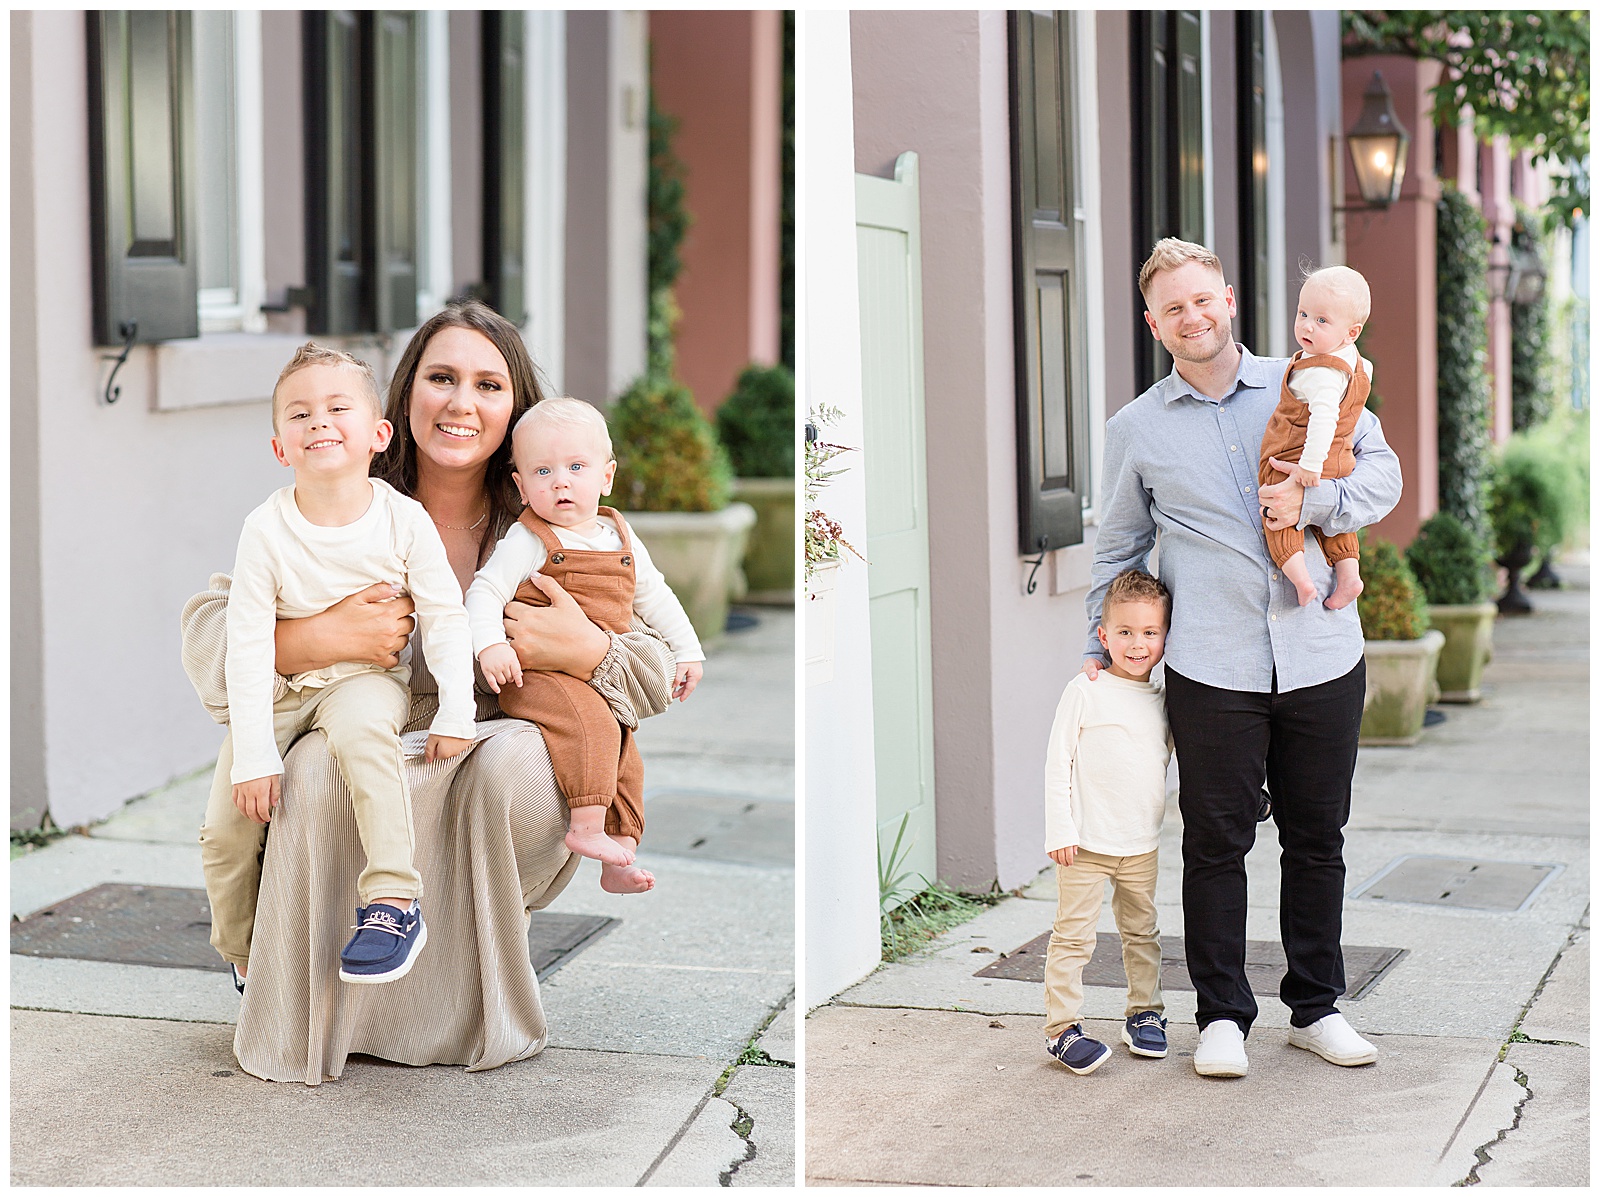 Mom squats and hold sons on her knees as she smiles at the camera of Rebecca Rice Photography in Charleston, SC. Dad holds sons in separate image as he holds the baby on his hip and the toddler stands next Dad putting his head on his hip.